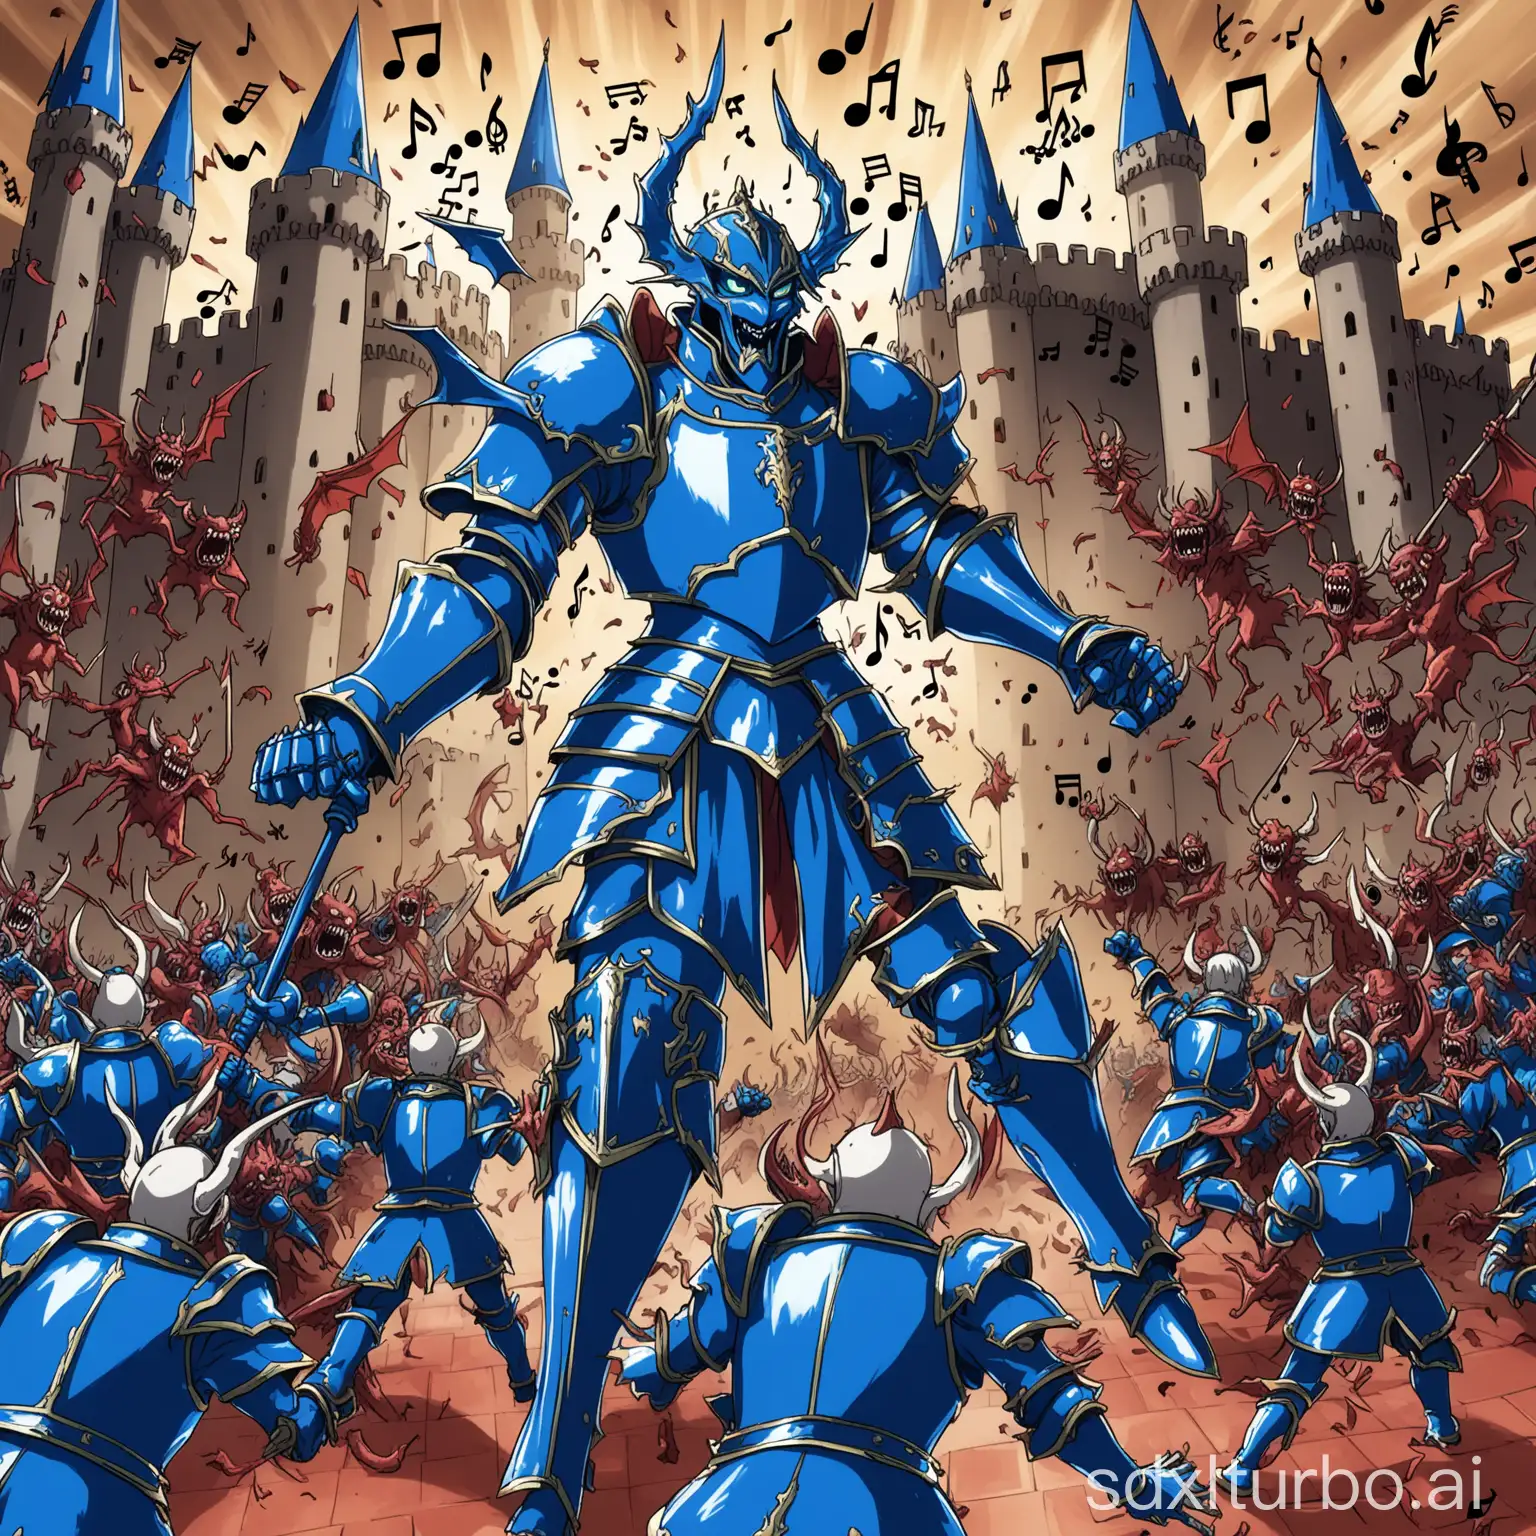 anime character in blue armor beating a horde of daemons in a musical castle